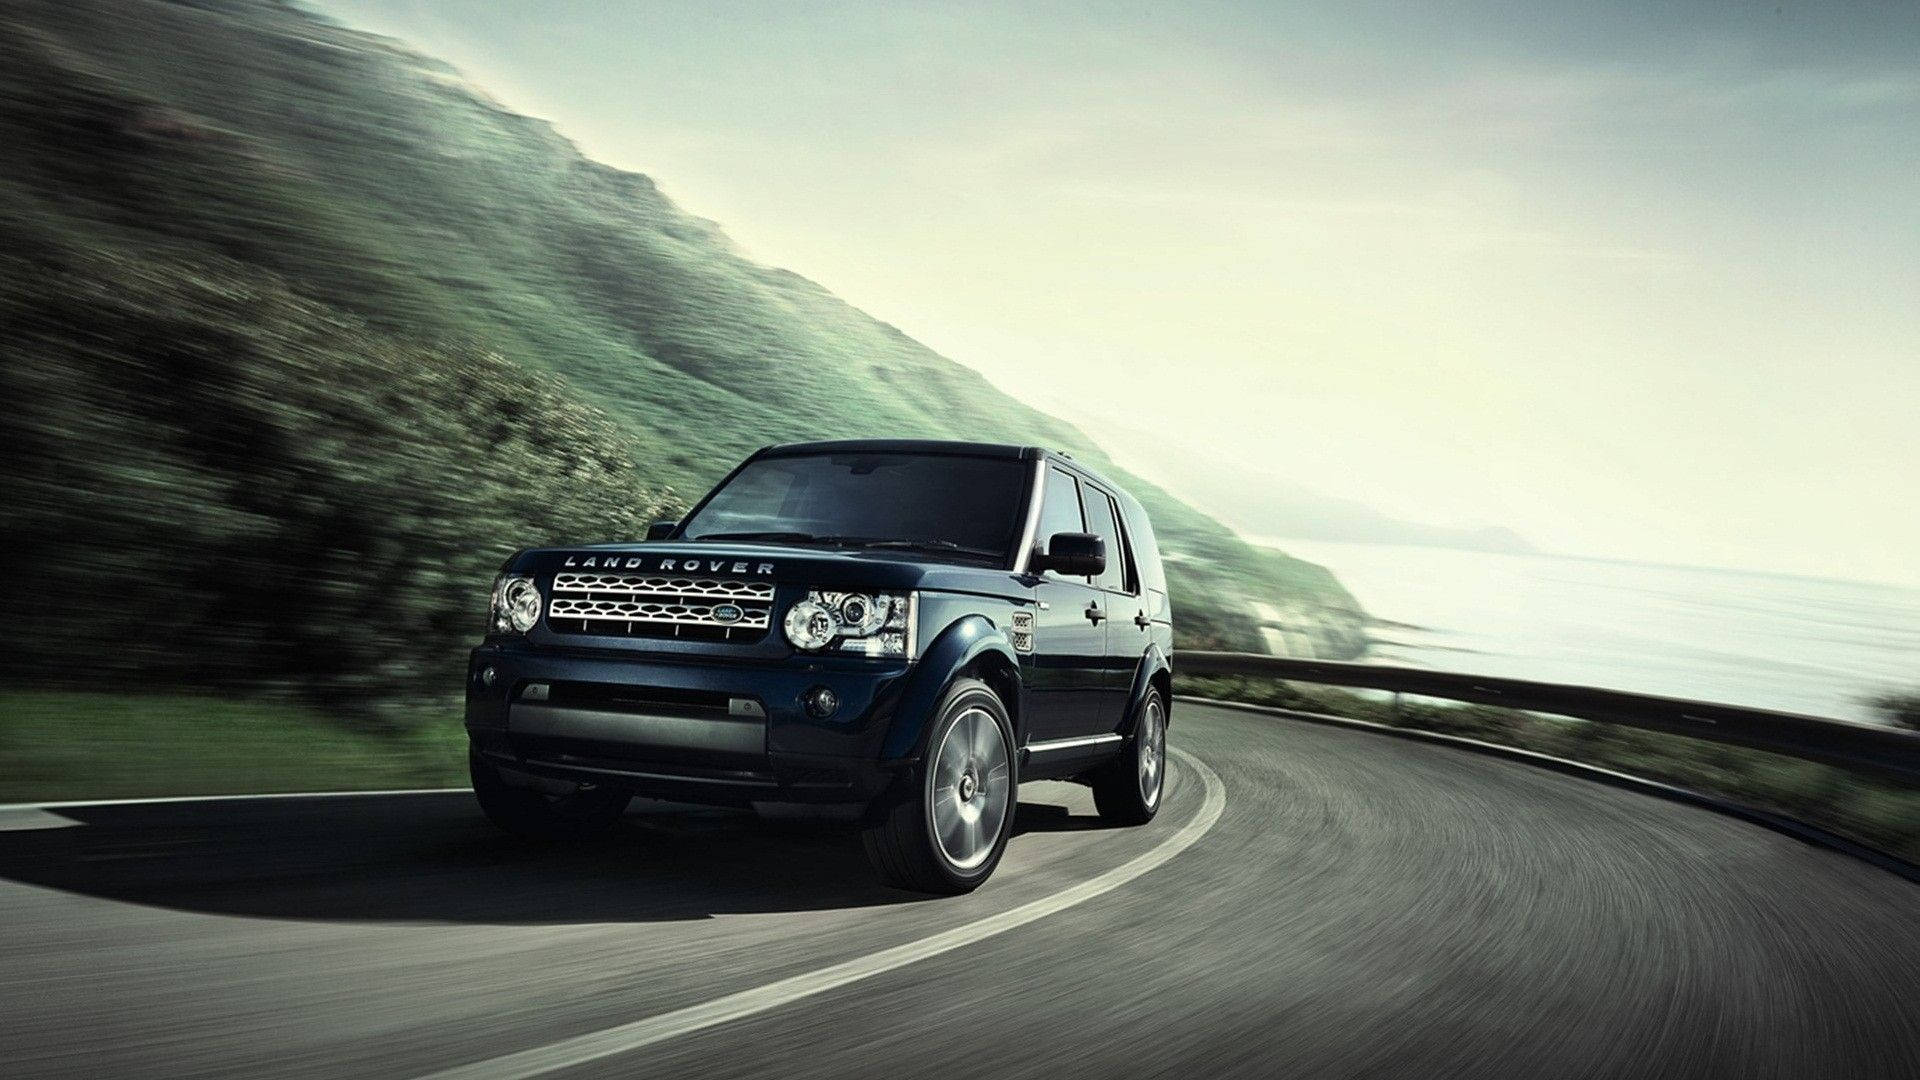 Dark Blue Land Rover Discovery 4 Wallpaper